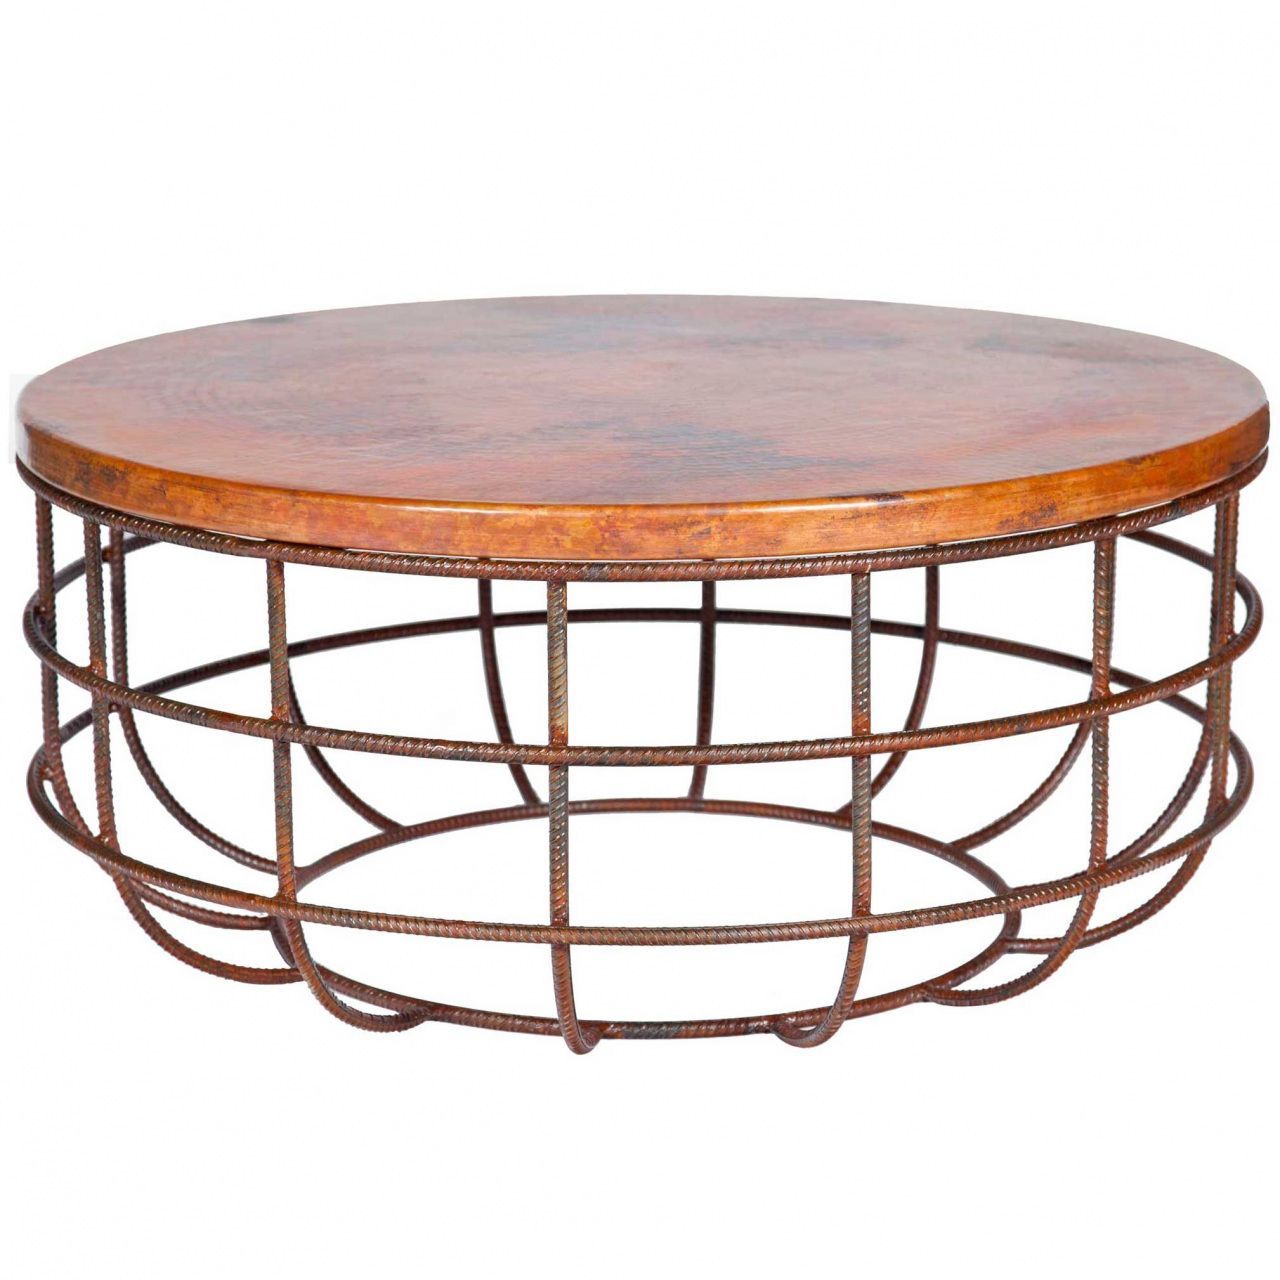 50+ Round Copper Coffee Table – Contemporary Modern In Round Iron Console Tables (View 20 of 20)